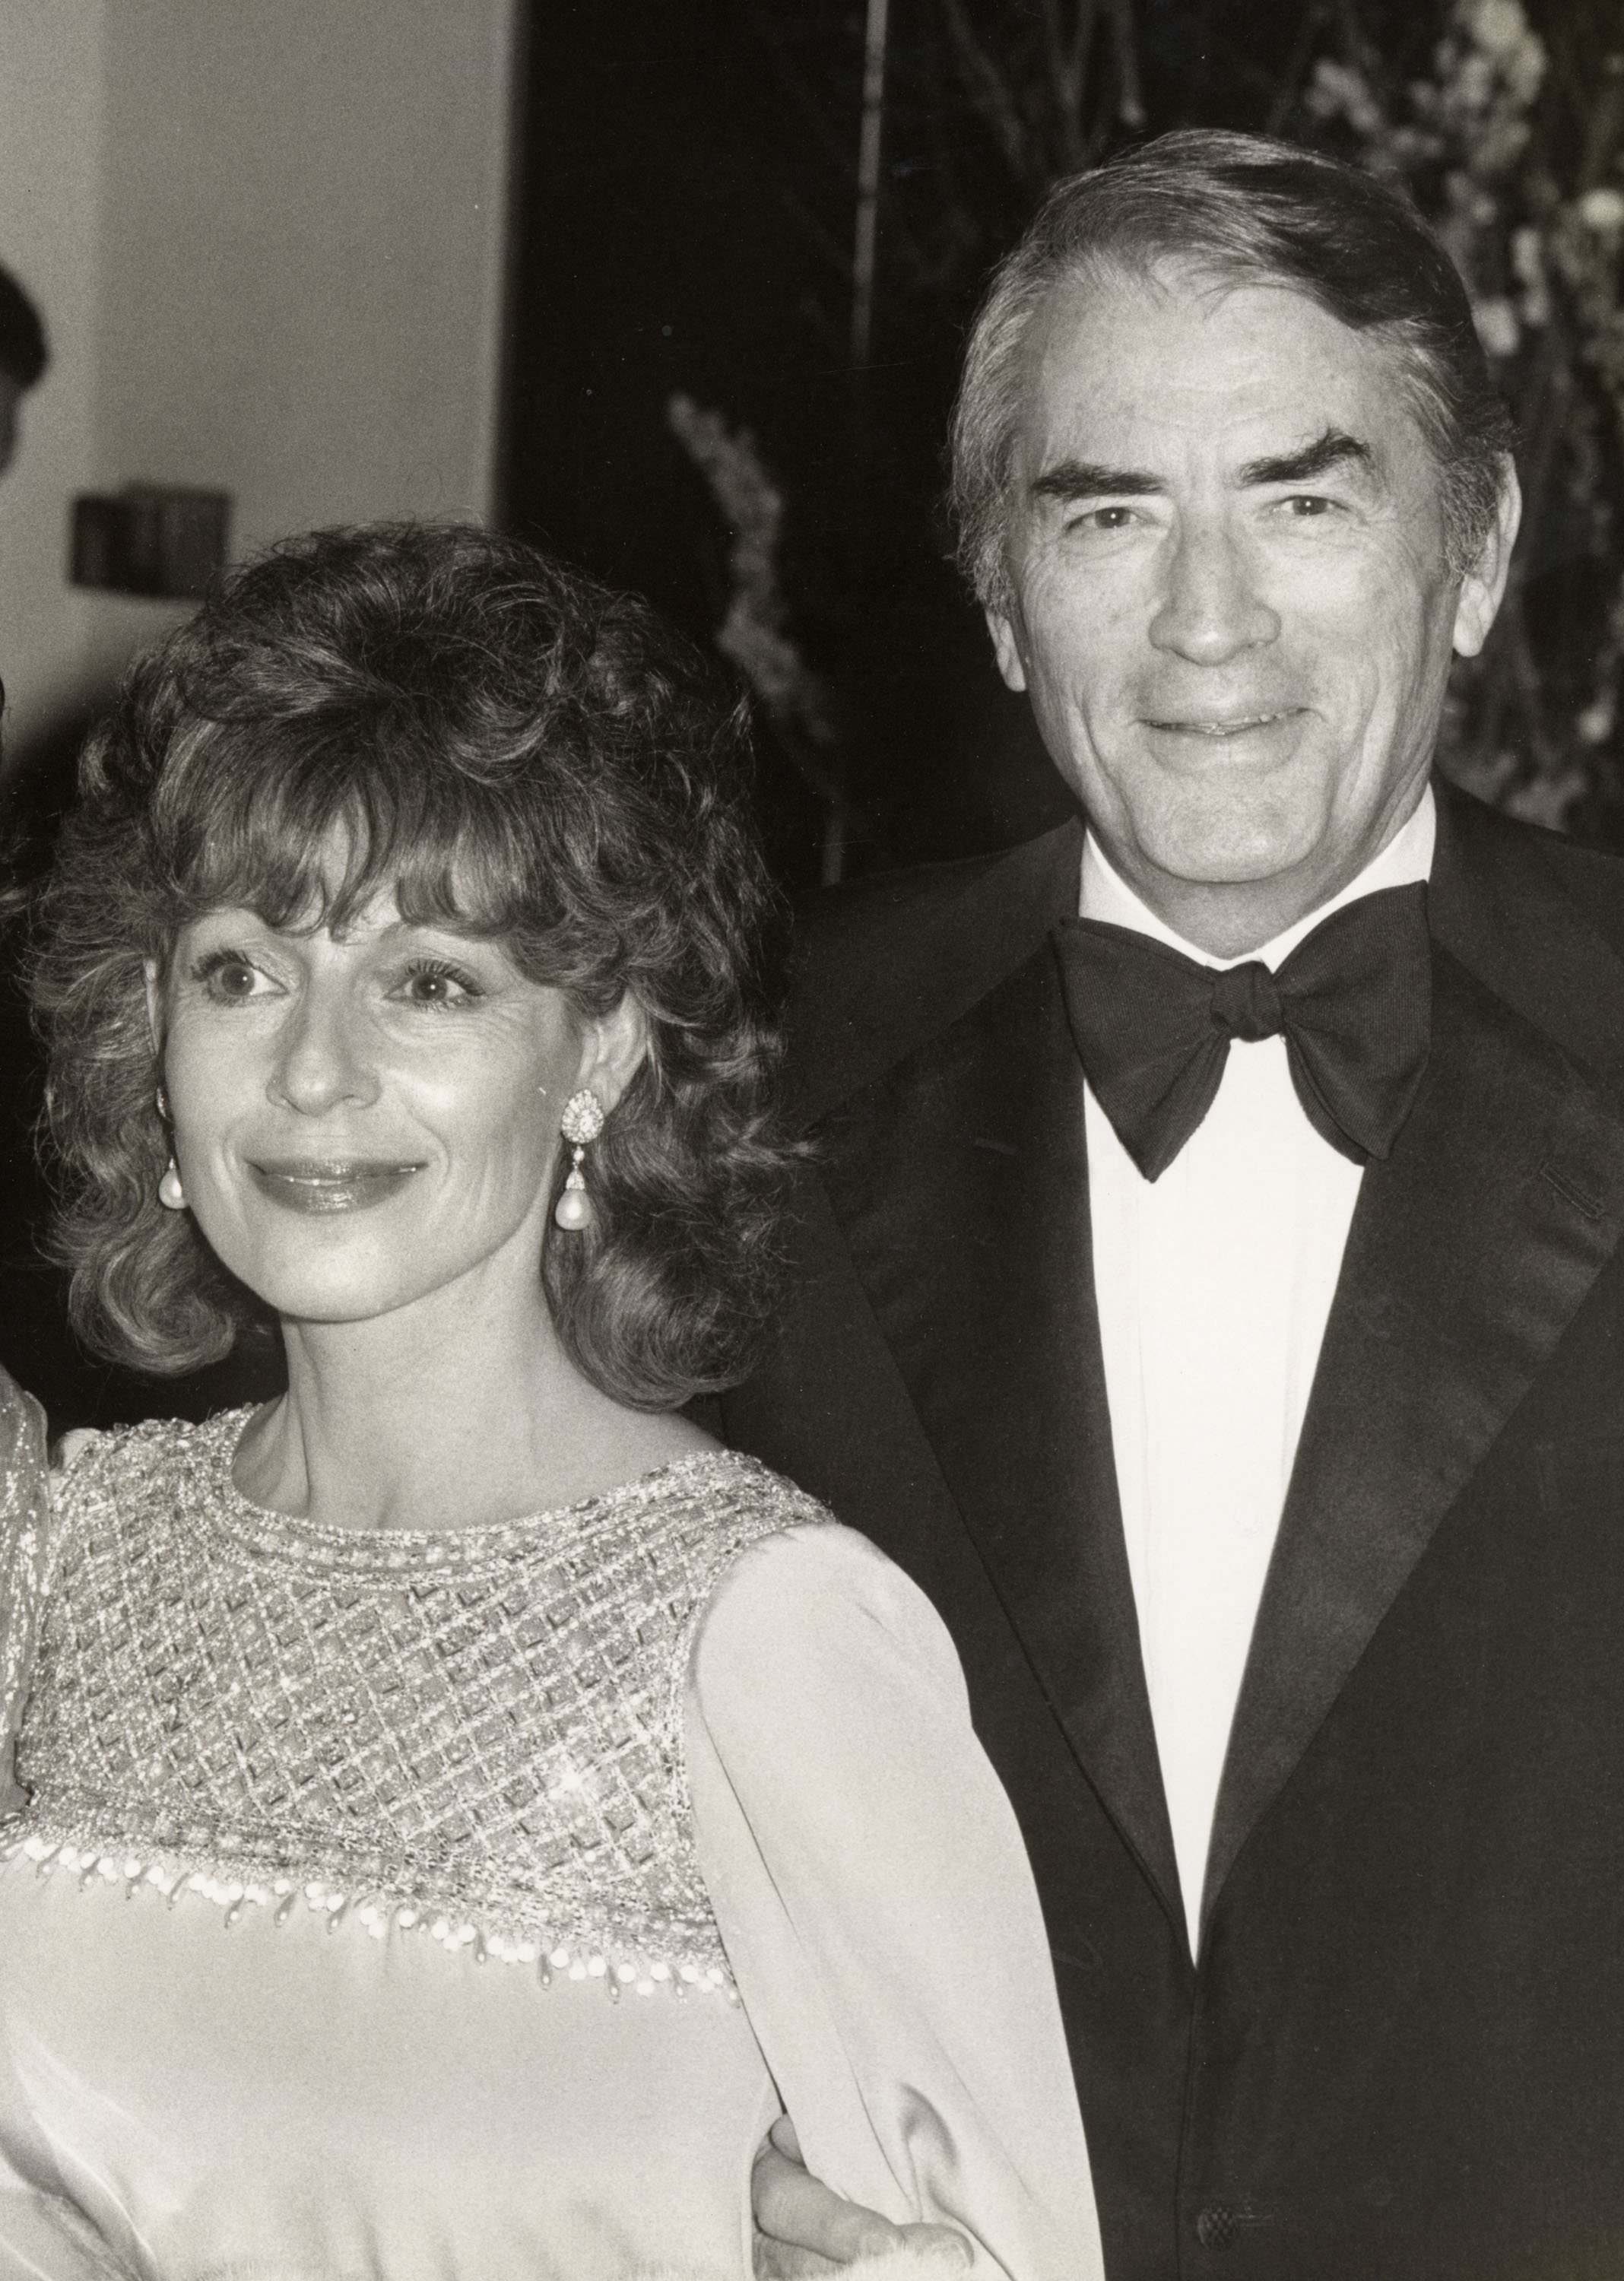 Gregory Peck and wife Veronique at Beverly Hilton Hotel in Beverly Hills, CA, United States. | Source: Getty Images